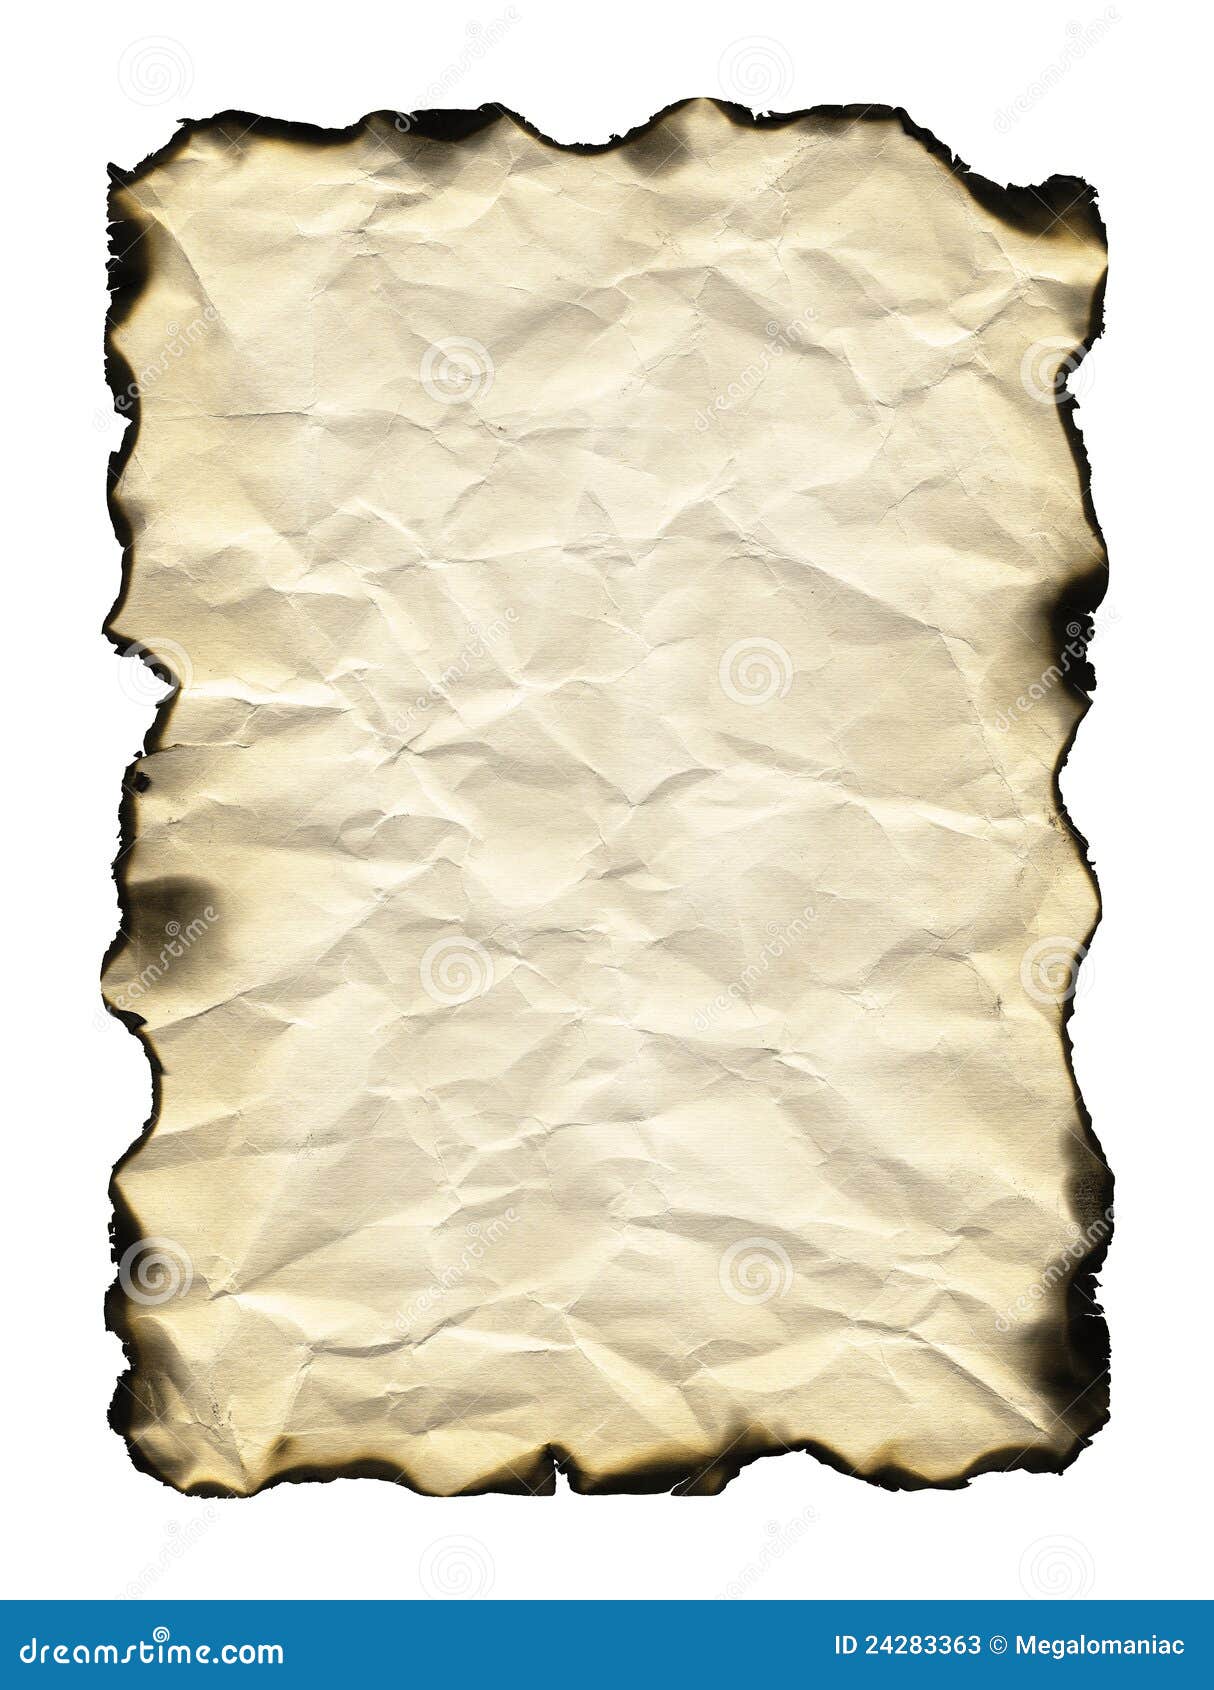 Plain aged paper with burnt edges - Stock Image - Everypixel